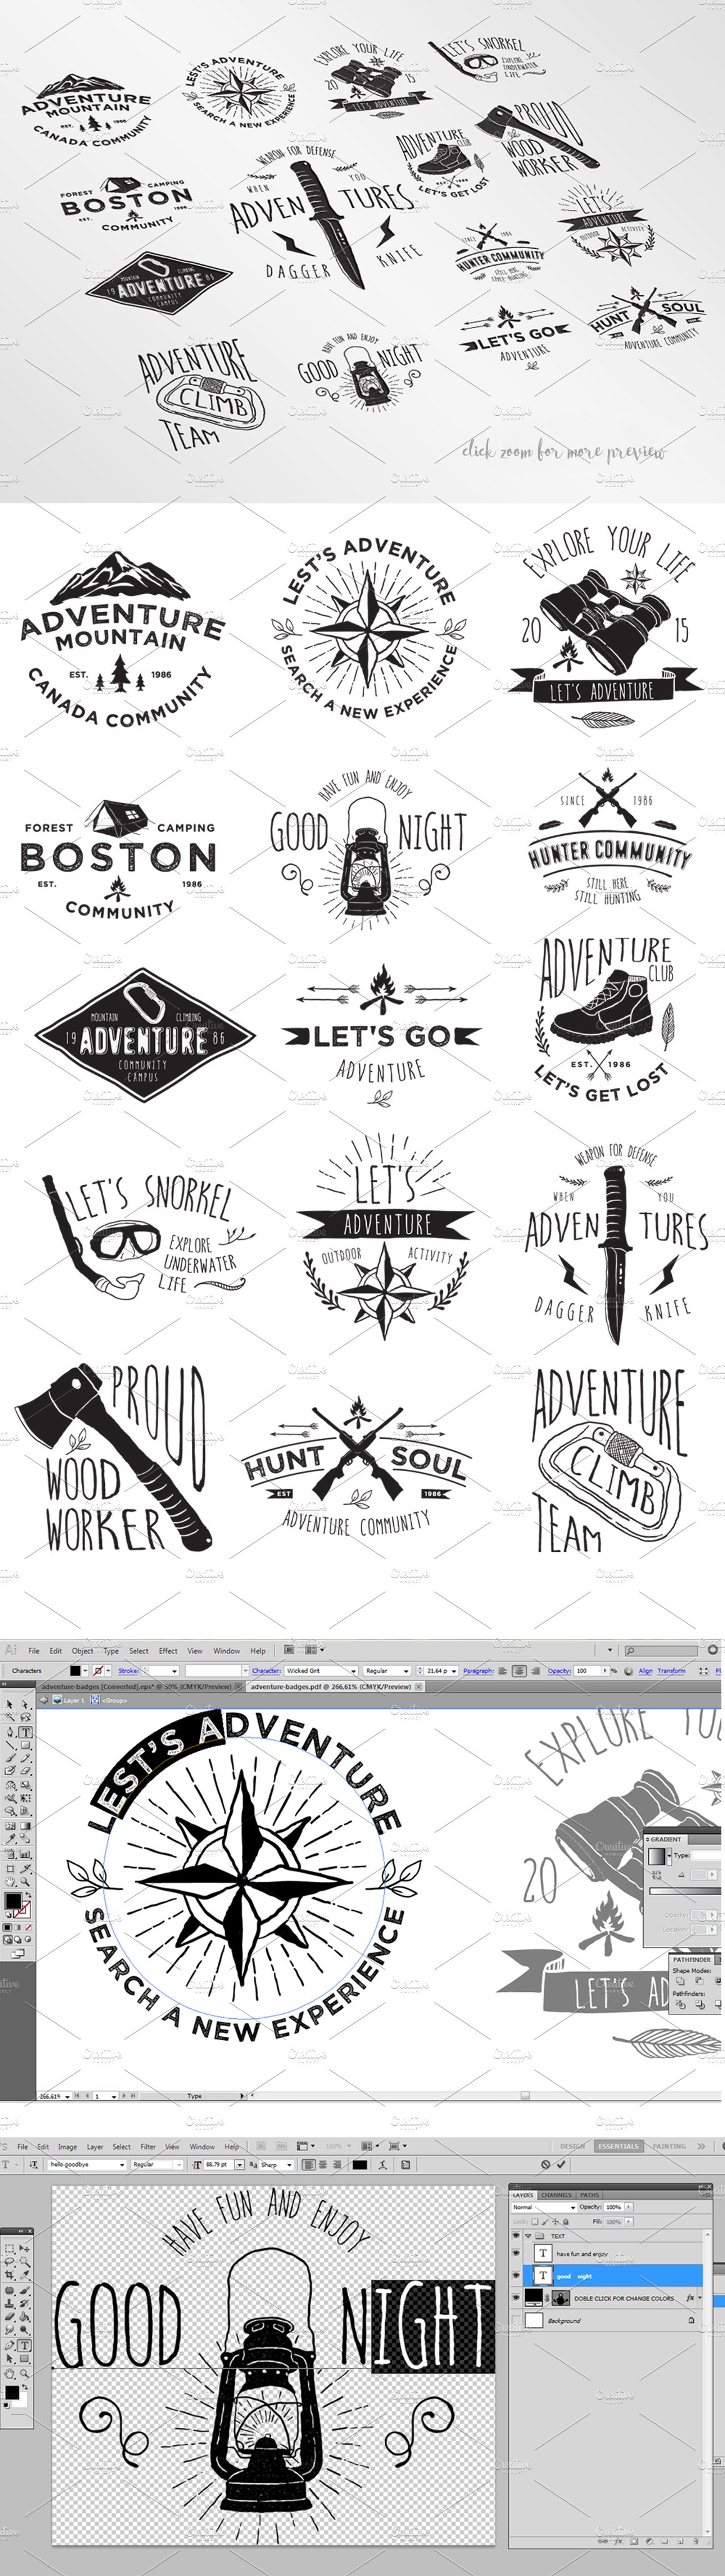 15 Adventure Badges cover image.